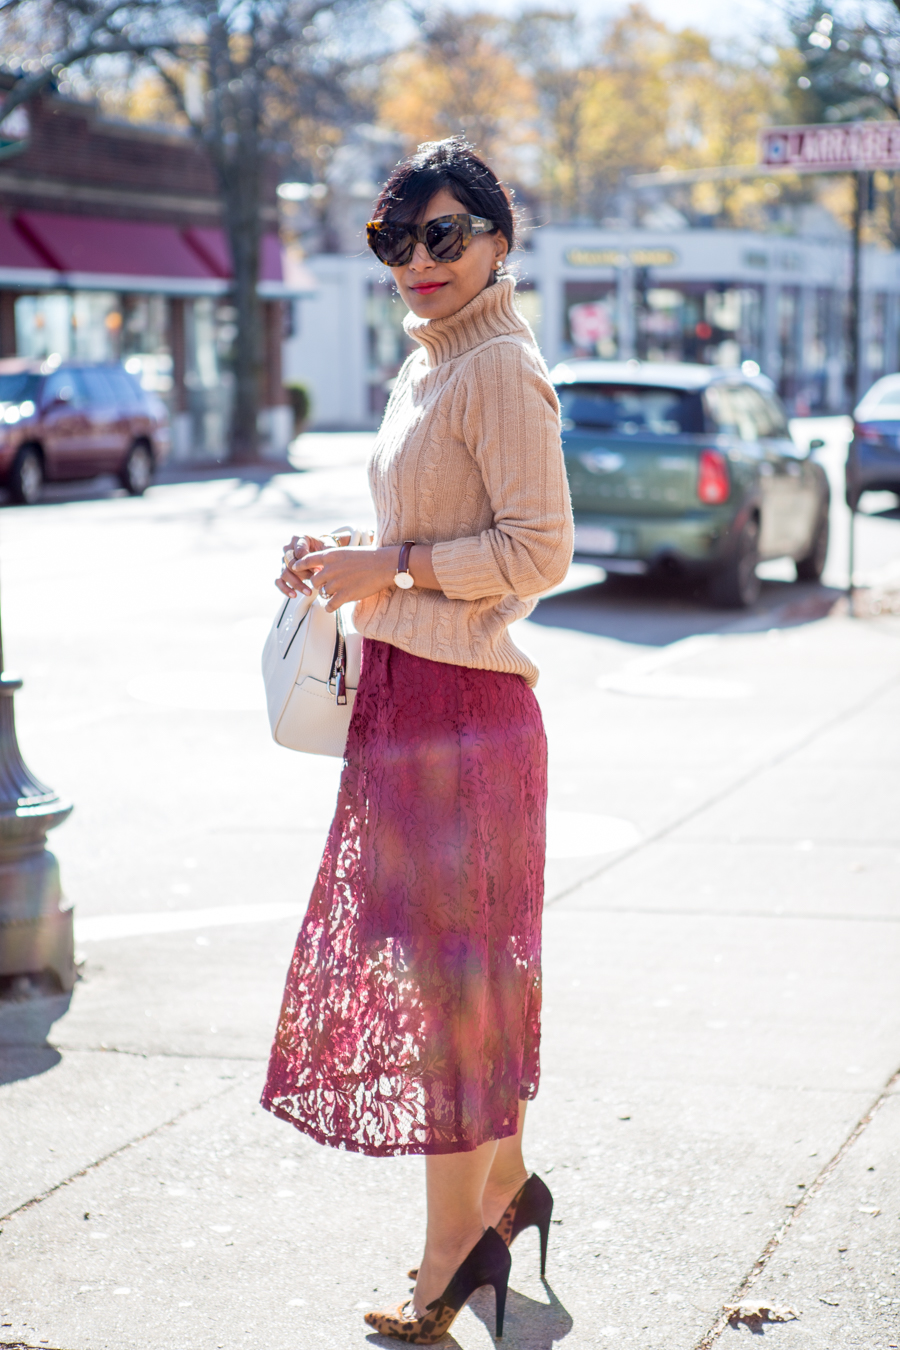 work style, office style, petite fashion, fall fashion, 9to5, office outfit, business casual, feminine work style, dressy, lace skirt, midi skirt, jcrew, h&m, petite style, petite style studio, affordable style, easy style, fashion over 40